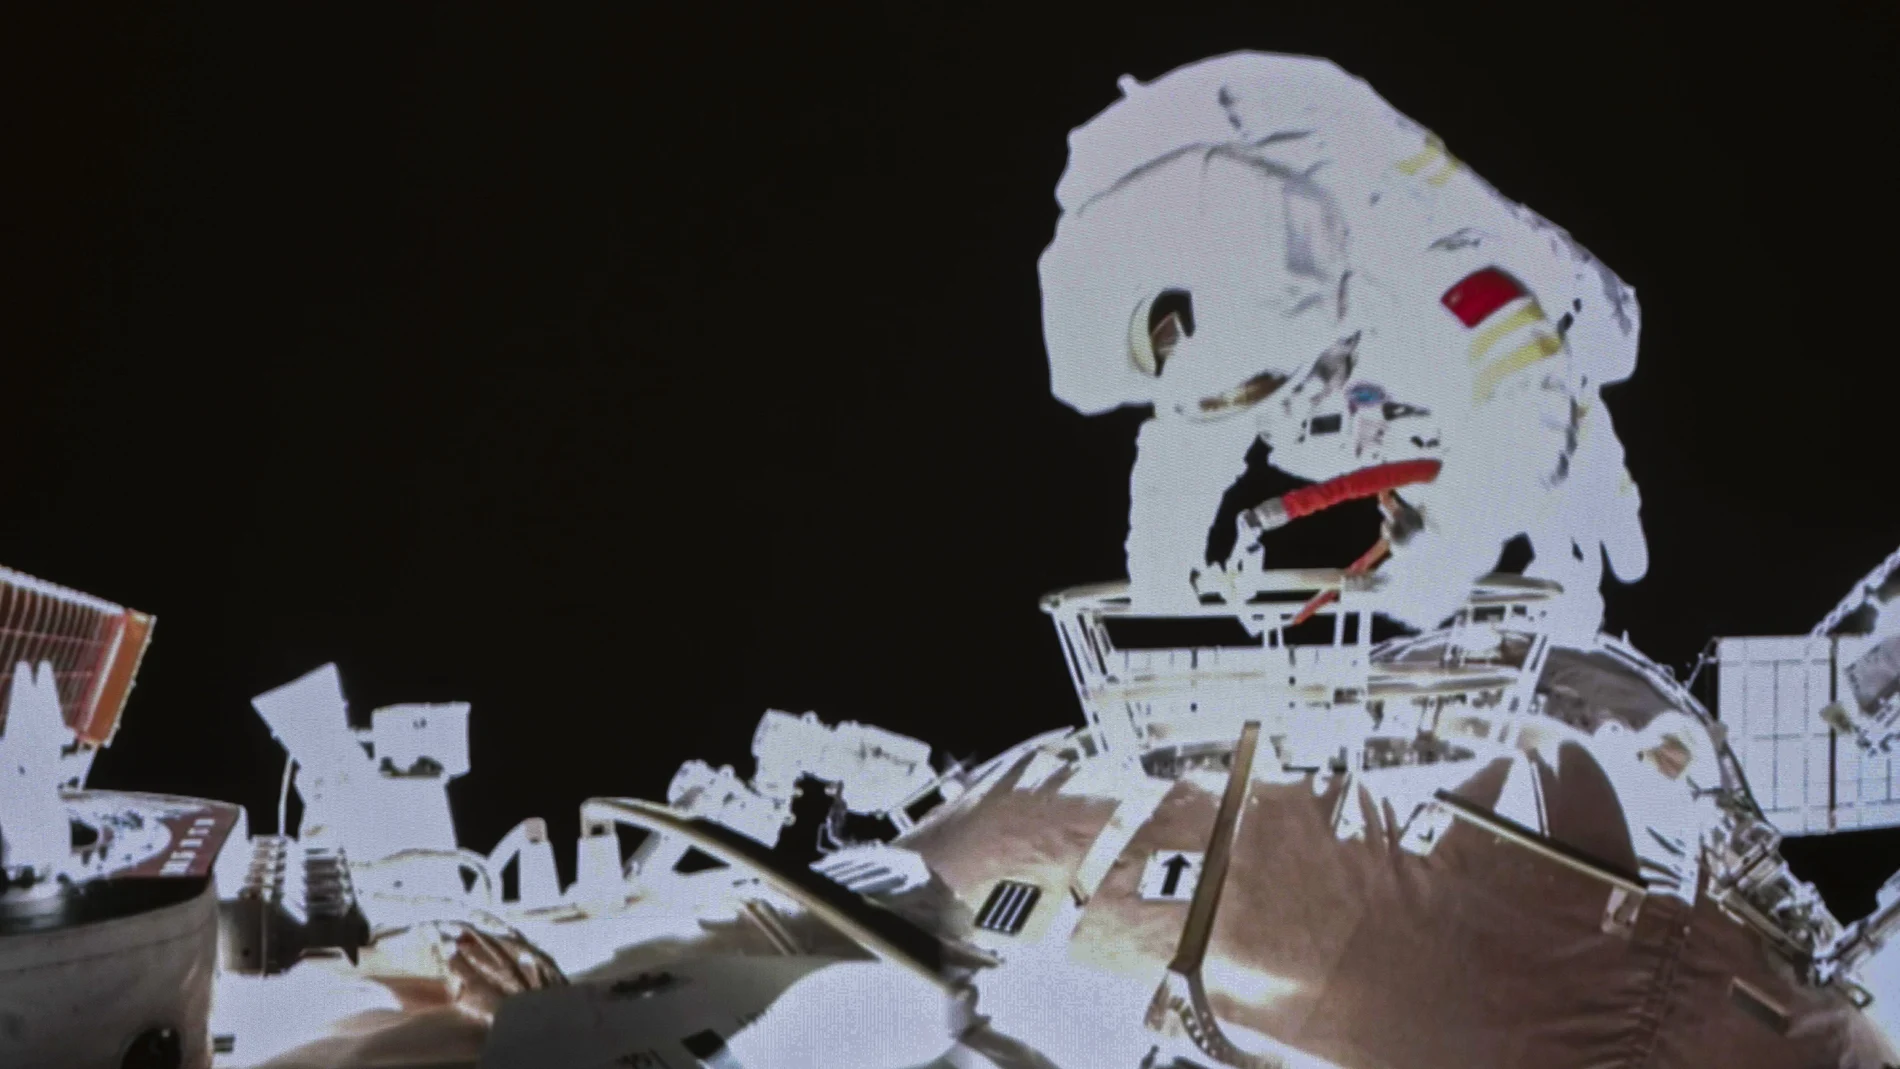 In this image released by the Xinhua News Agency, a photo taken on a screen shows Chinese astronaut Wang Yaping conducts an activities outside the space station's Tianhe core module, at Beijing Aerospace Control Center on Sunday, Nov. 7, 2021. Wang Yaping has become the first Chinese woman to conduct a spacewalk as part of a six-month mission to the country's space station. Wang and fellow astronaut Zhai Zhigang left the station's Tianhe core module on Sunday evening Beijing time, spending more than six hours installing equipment and carrying out tests alongside the station's robotic service arm. (Guo Zhongzheng/Xinhua via AP)